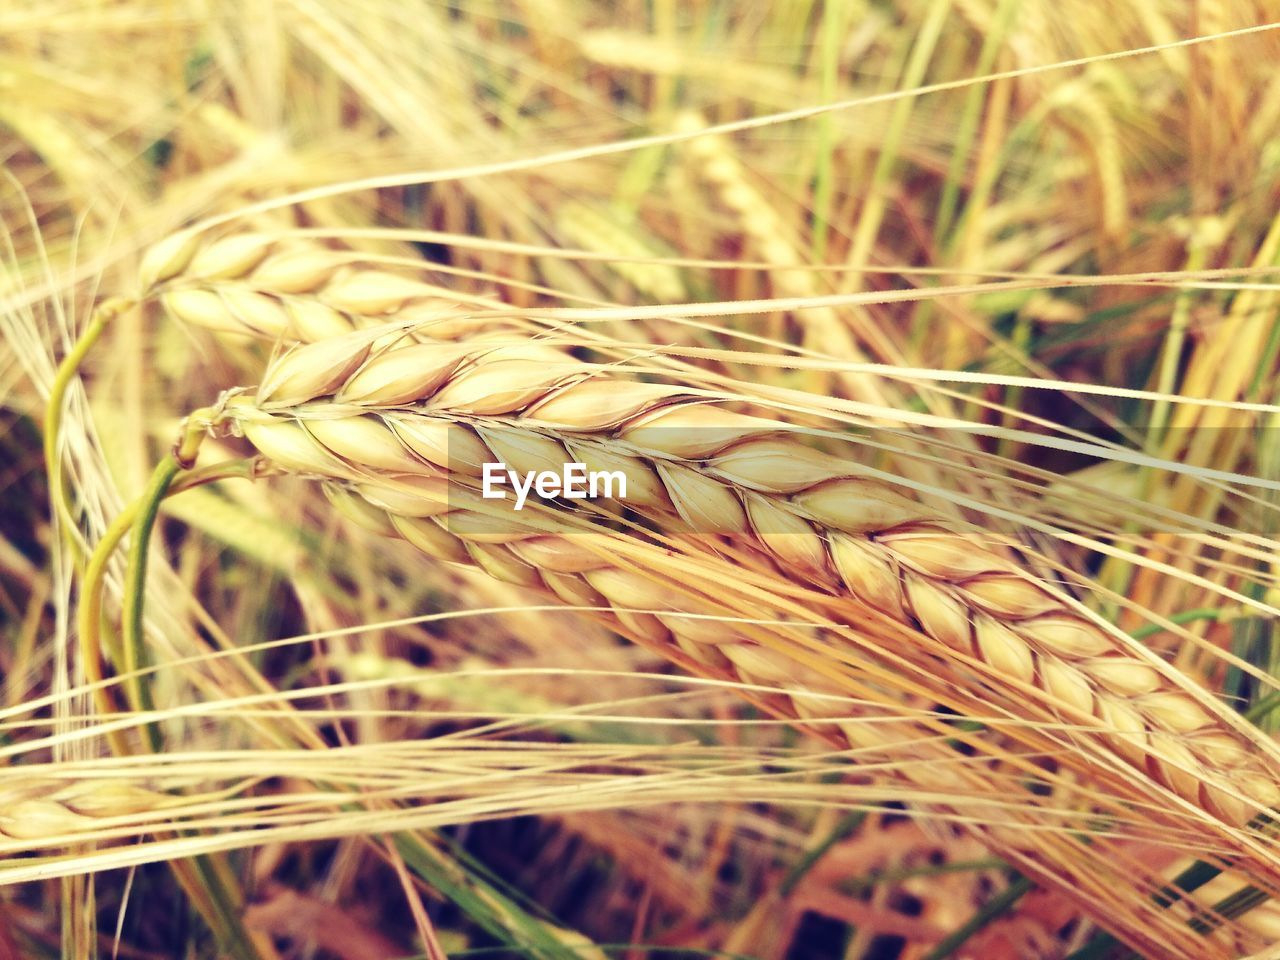 Close-up of wheat growing in field